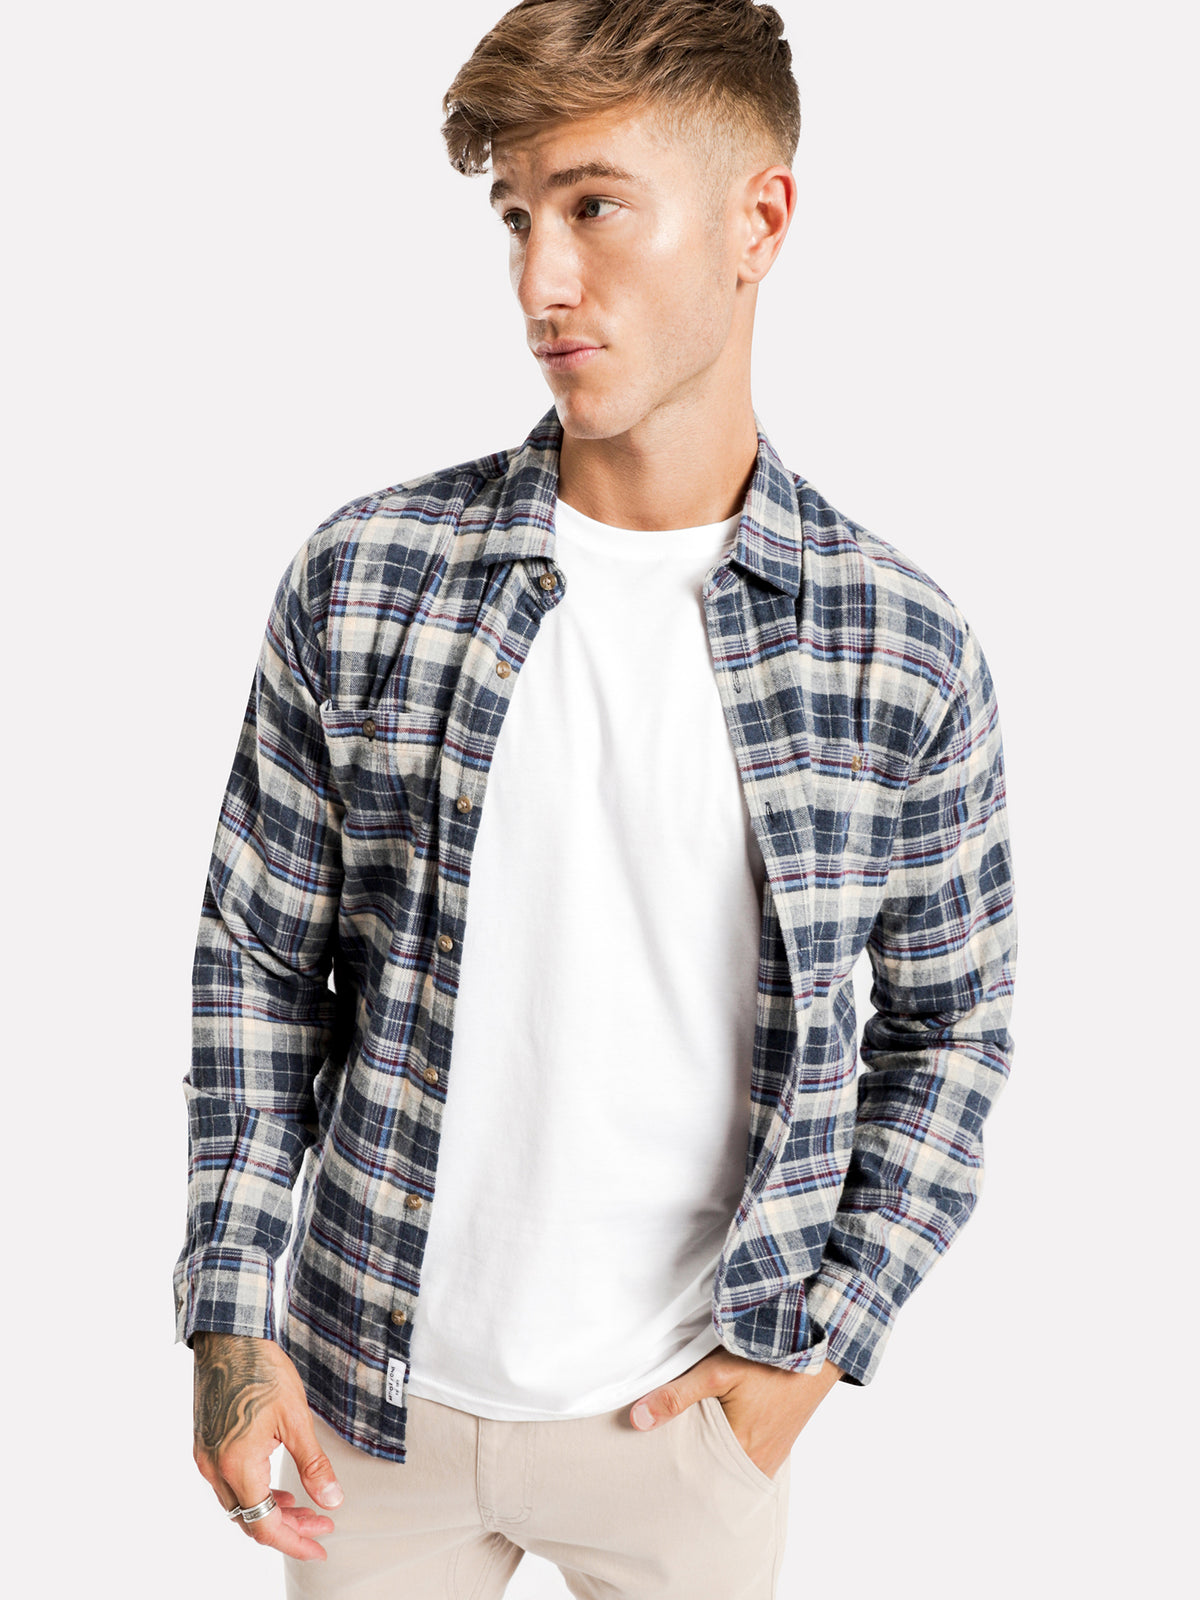 Knox Flannel Shirt in Navy Plaid